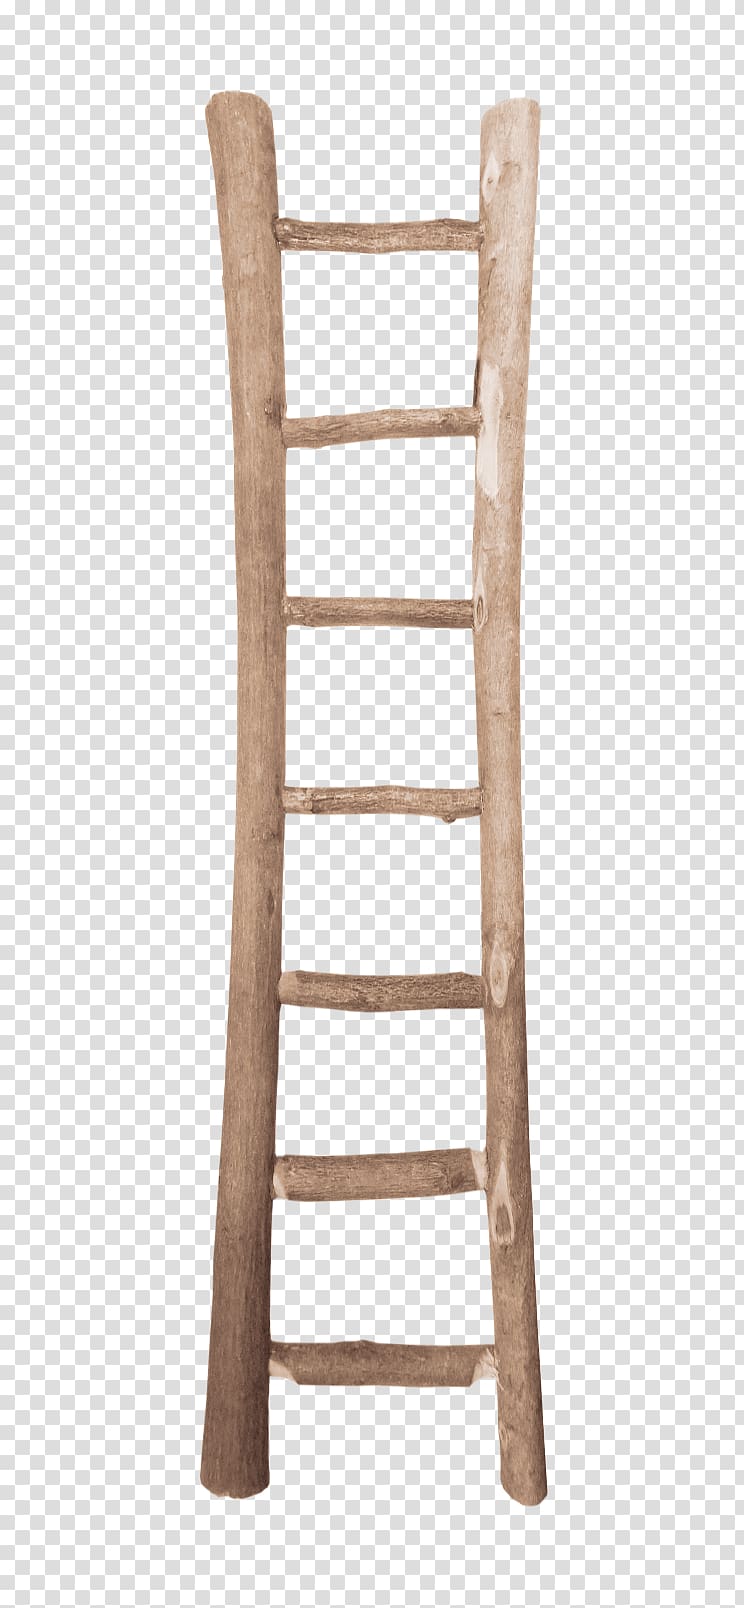 Ladder Wood Stairs Keukentrap, Long wooden ladder transparent background PNG clipart